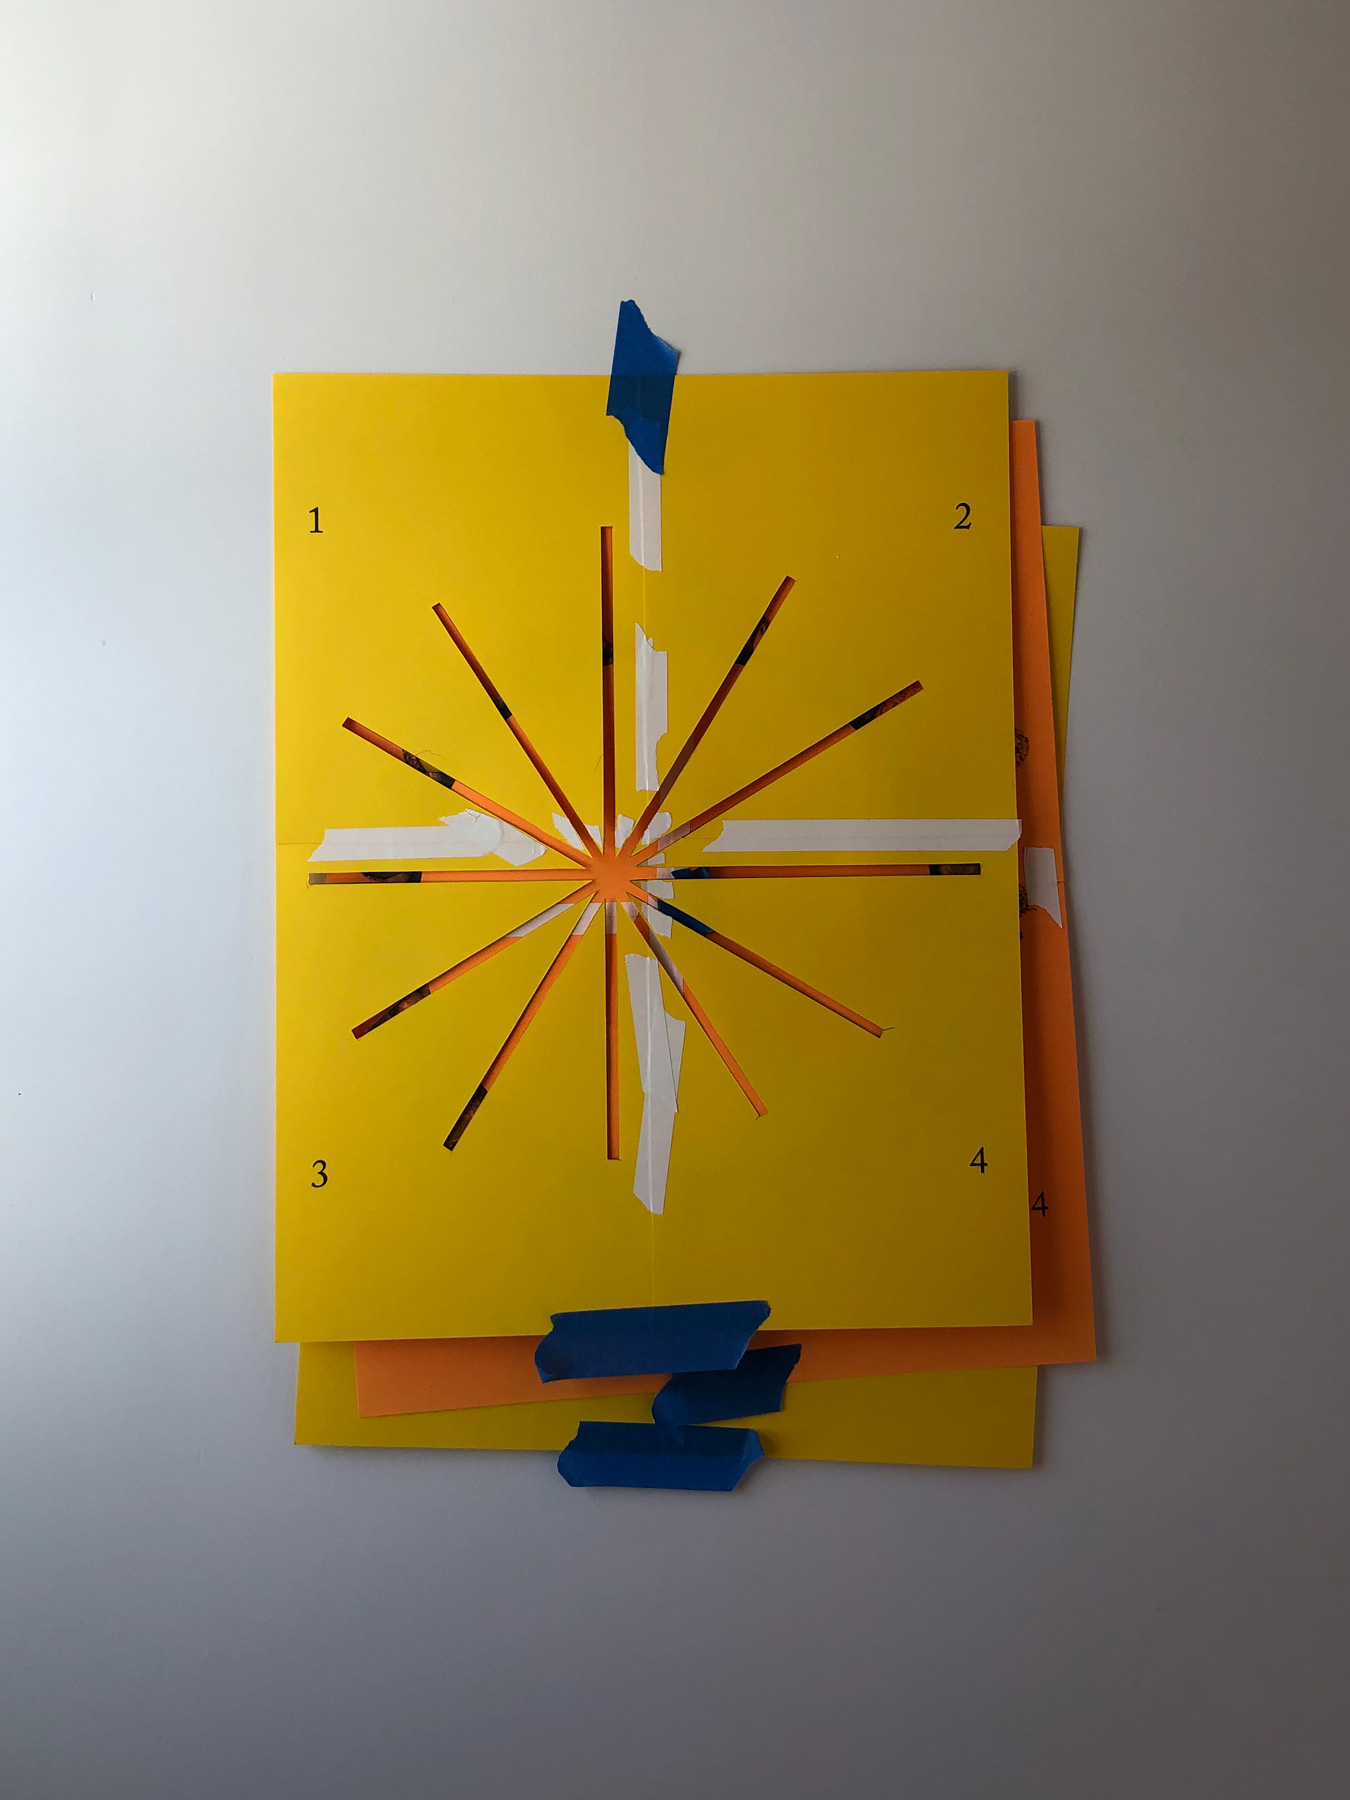 Let the Sun In (A Sun for Every Door), 2019